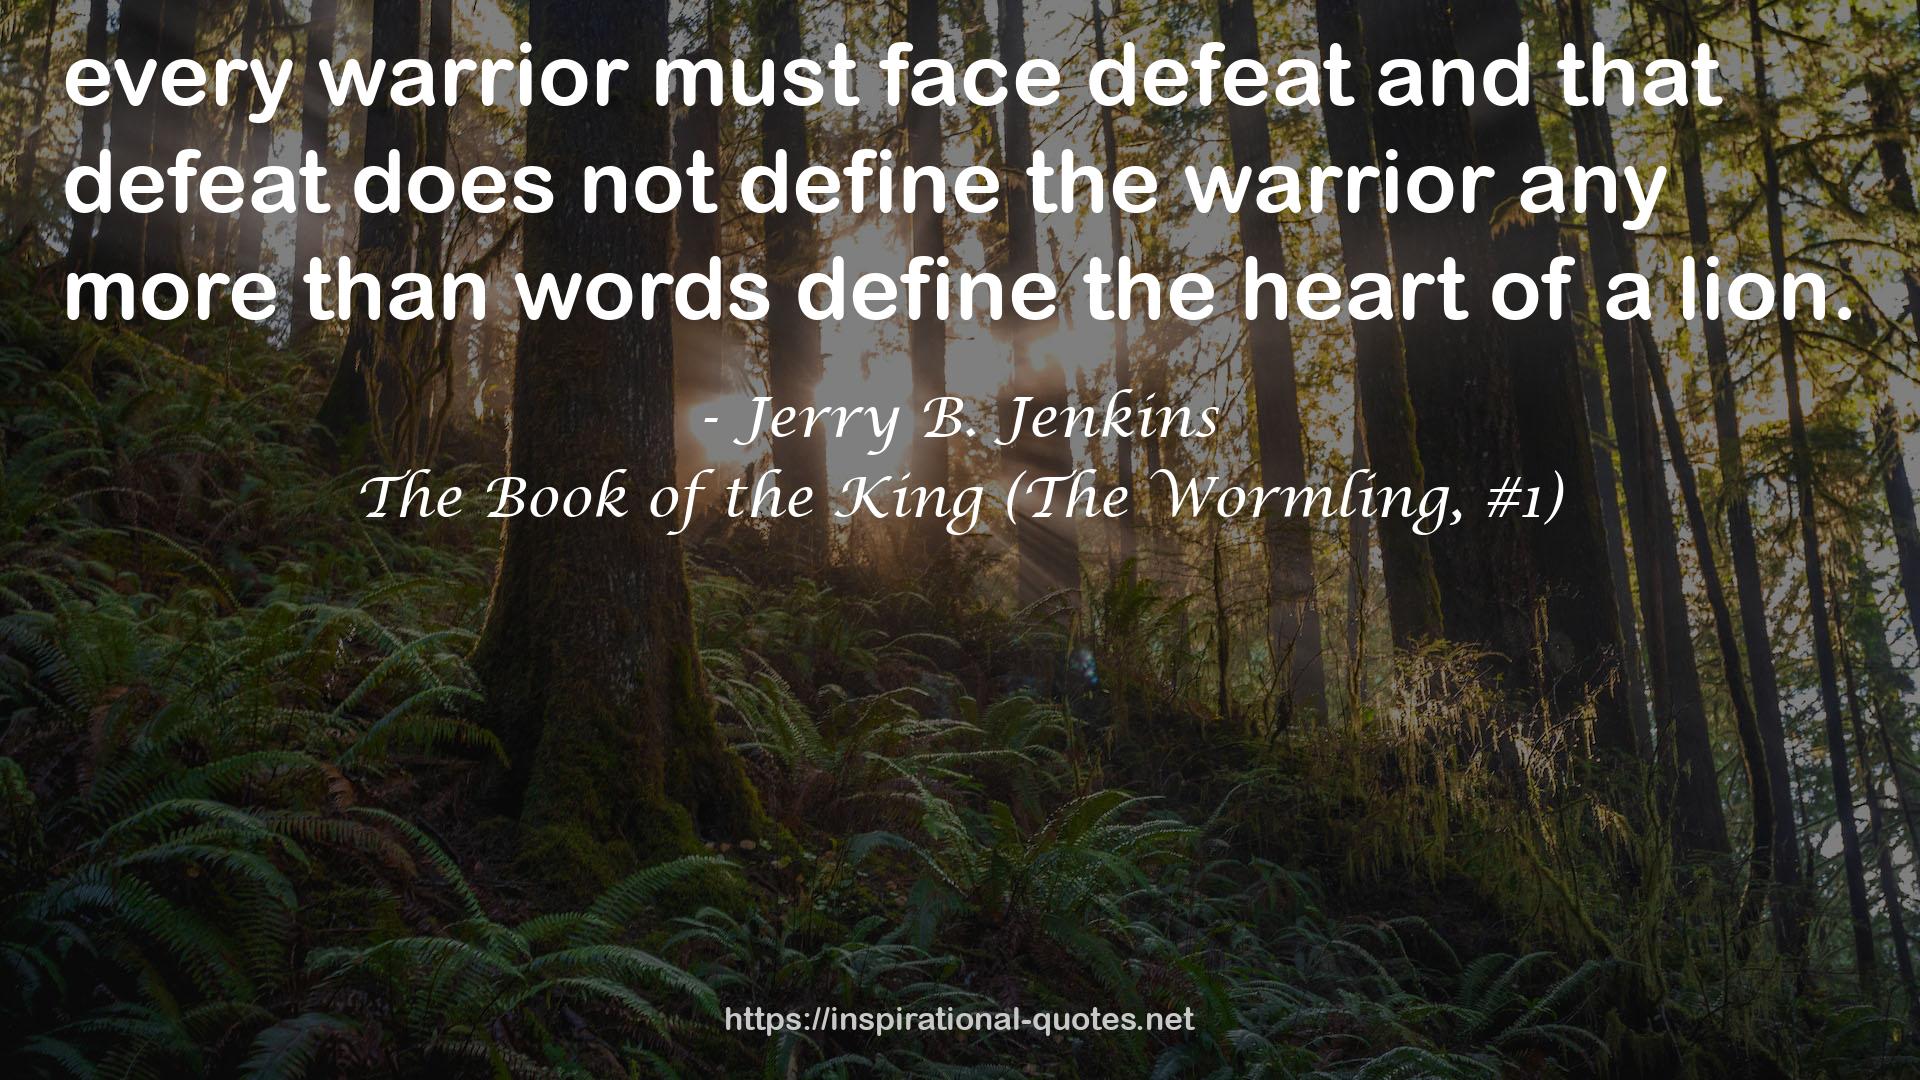 The Book of the King (The Wormling, #1) QUOTES